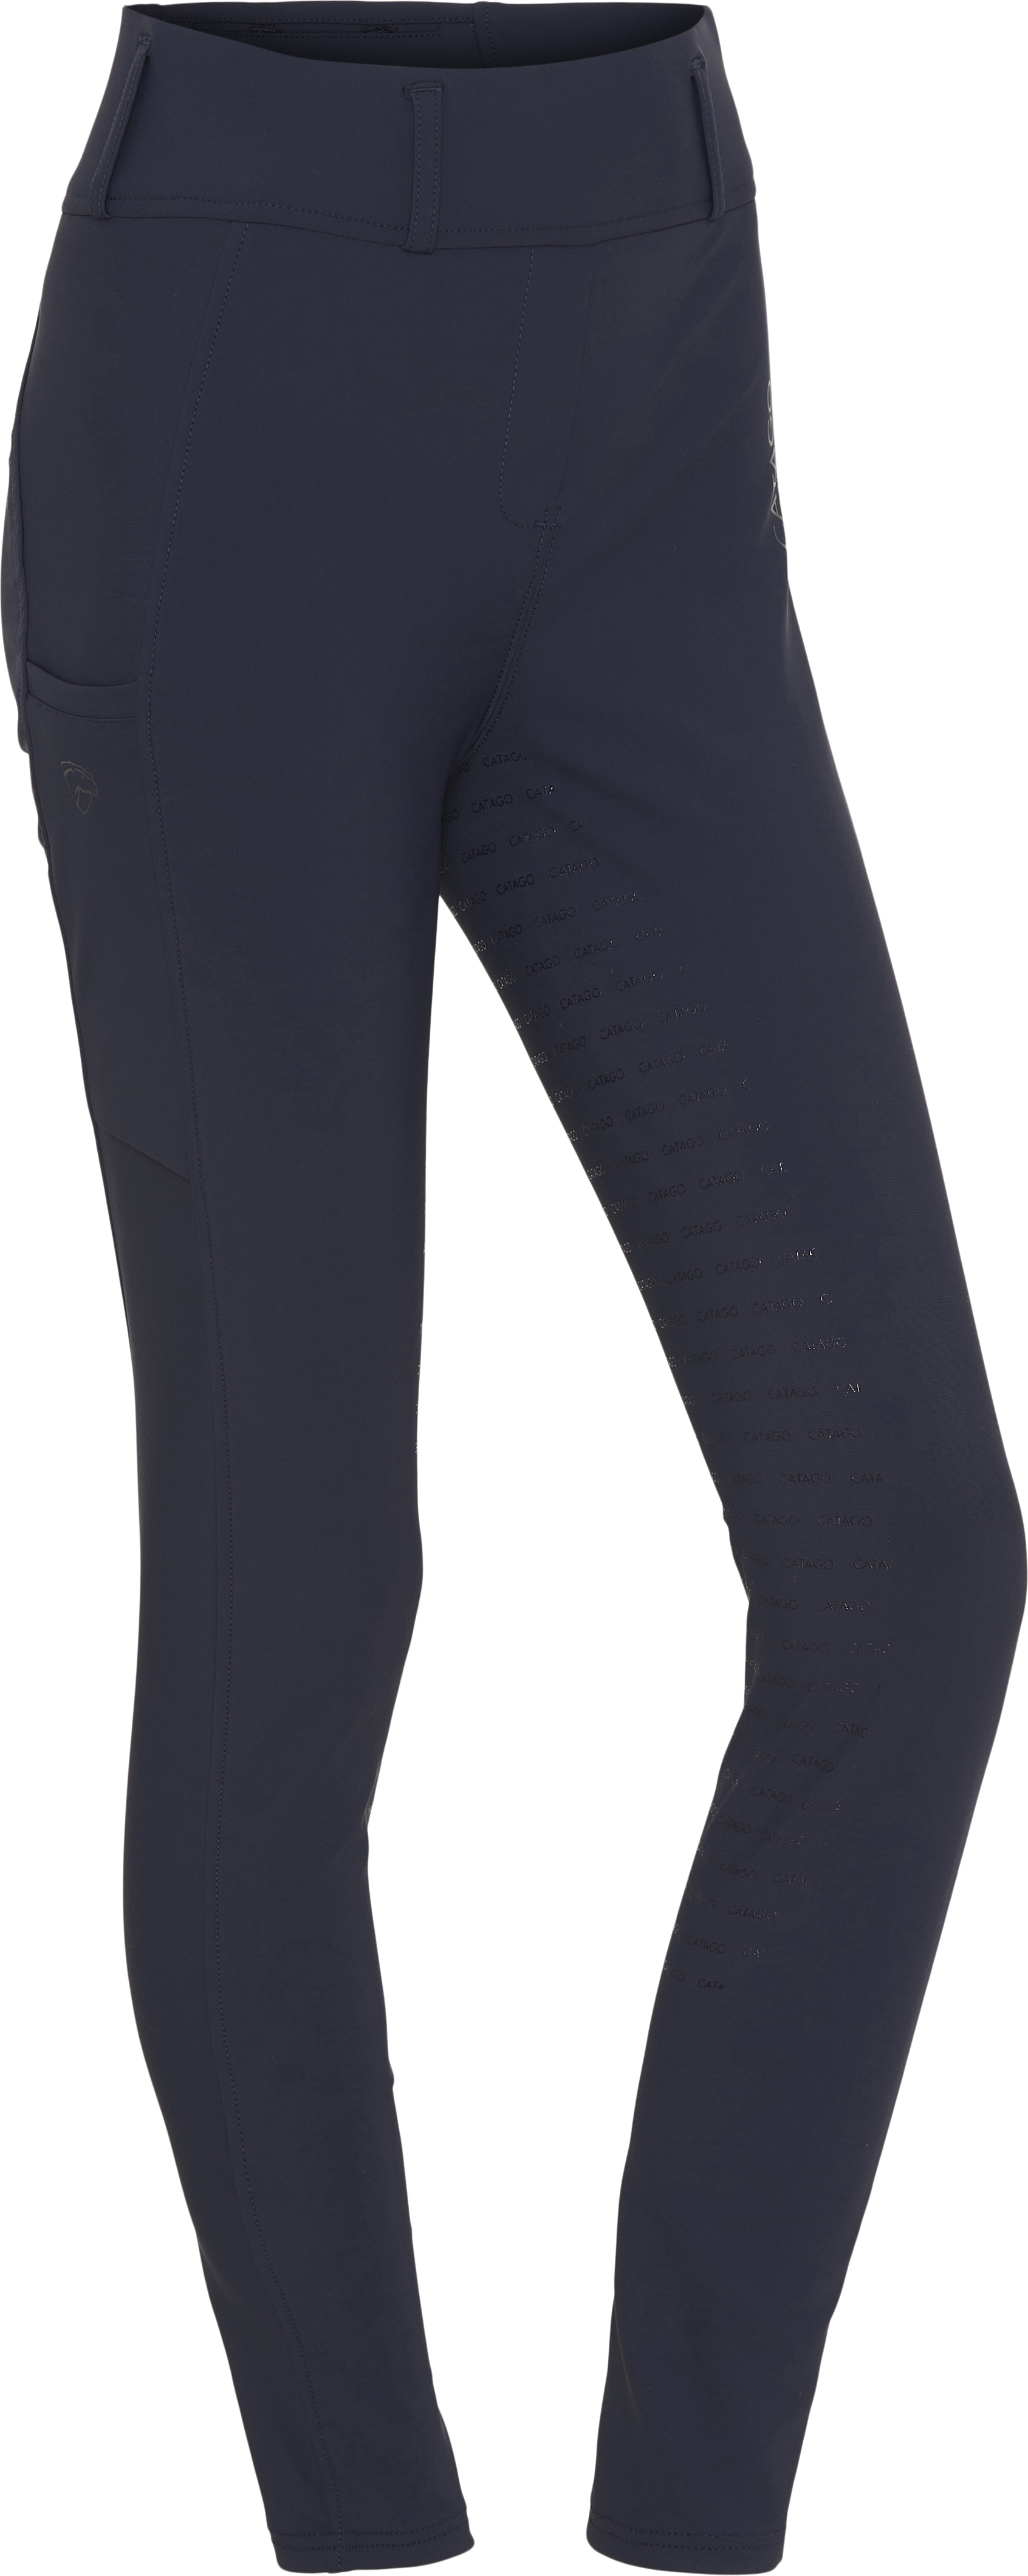 CATAGO River Tights Fullgrip With Belt Loops - Navy (3XL), Catago